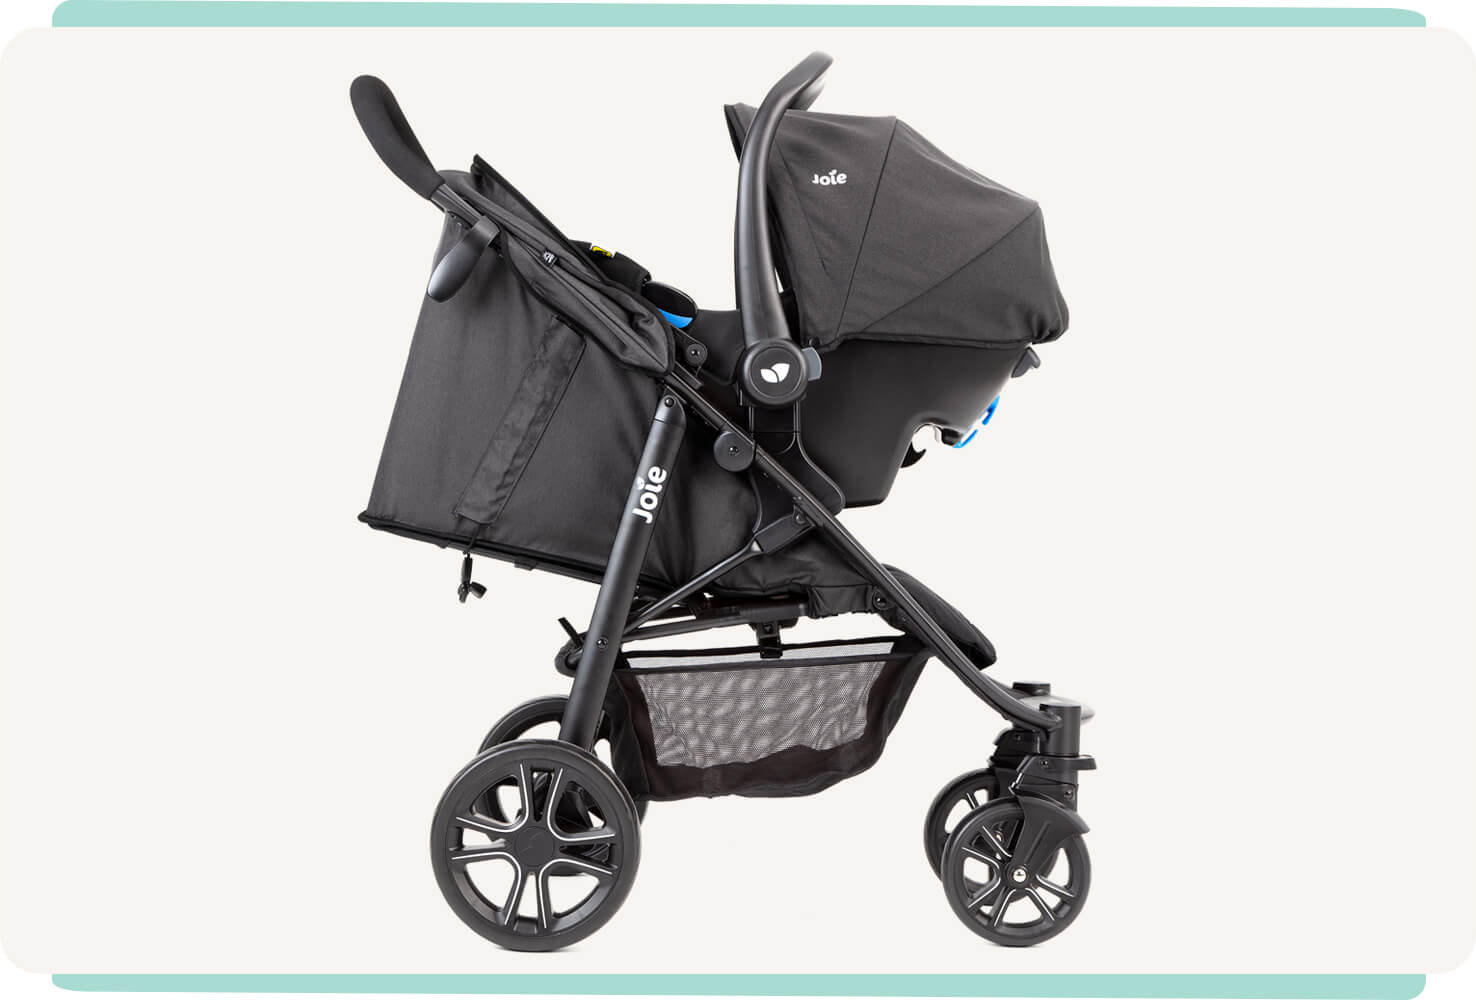 Black Joie Litetrax E travel system with the infant car seat attached to the stroller, facing toward the right in profile.